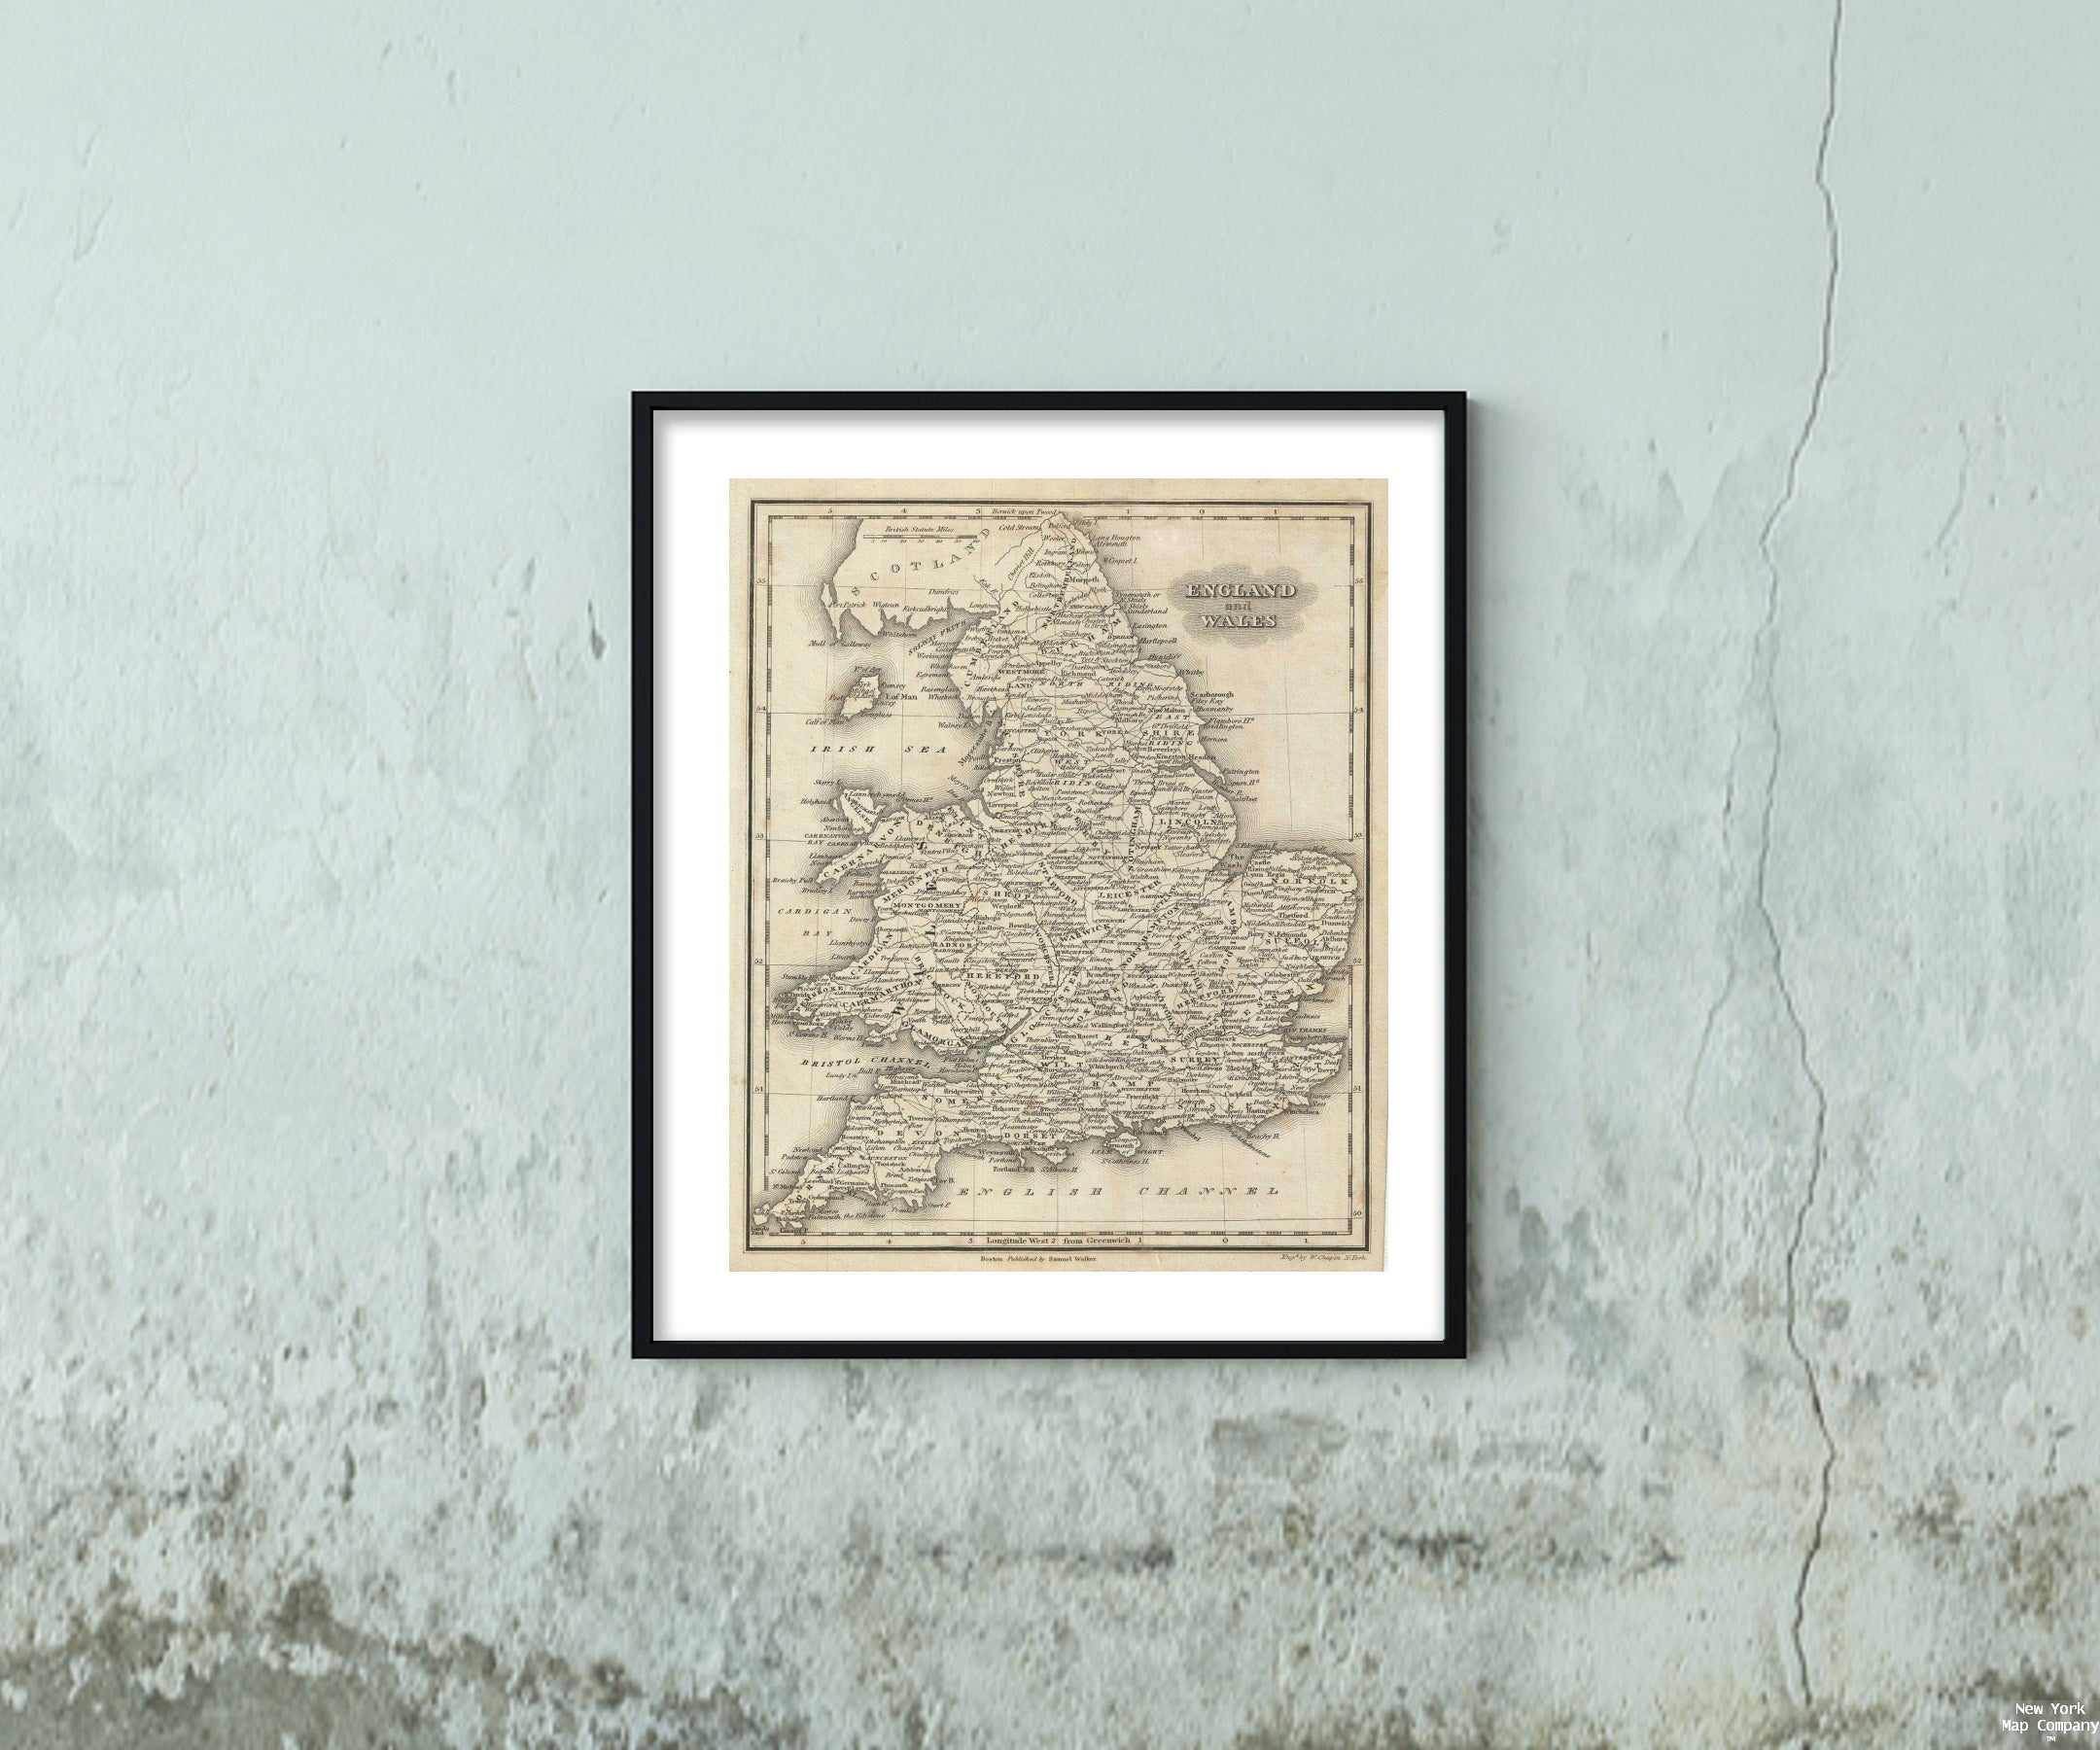 This is an attractive example of the 1828 Malte-Brun map of england and Wales. The map covers both england and Wales from Northumberland to Cornwall and includes the Isle of Man. Various, important rivers, islands, cities and other topographical details